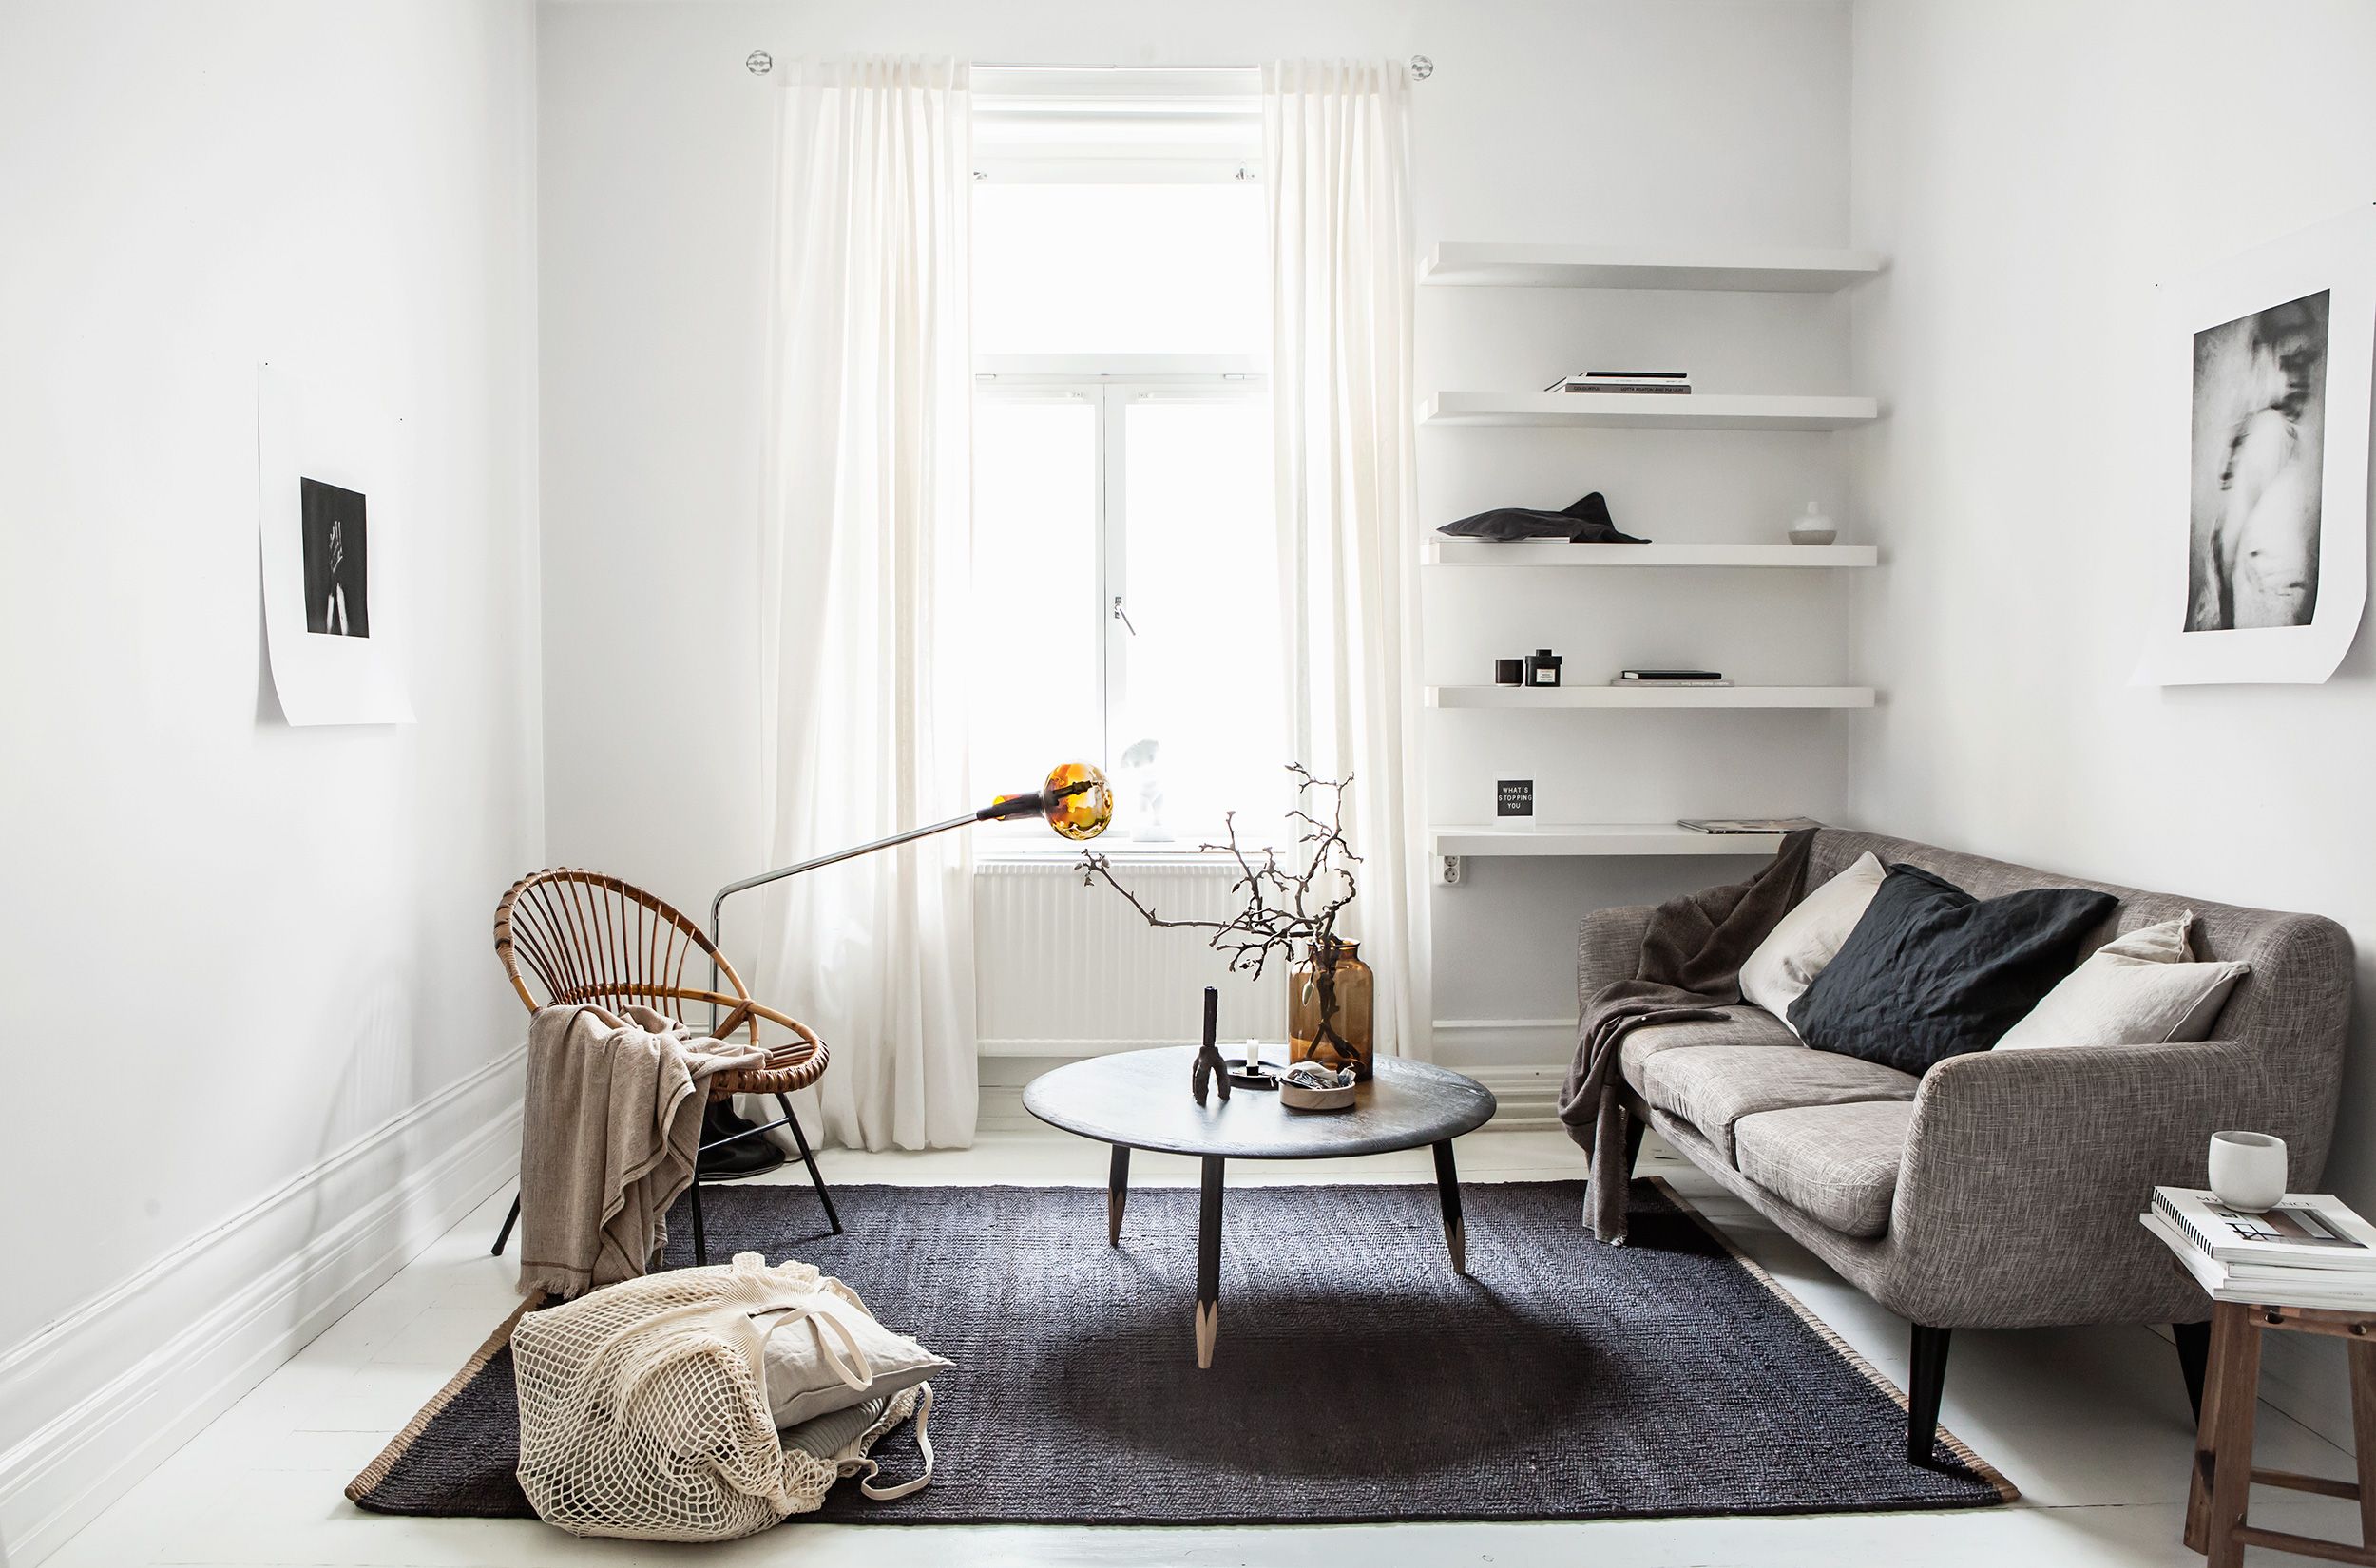 The Minimalist Living room – What Makes it so Extraordinary